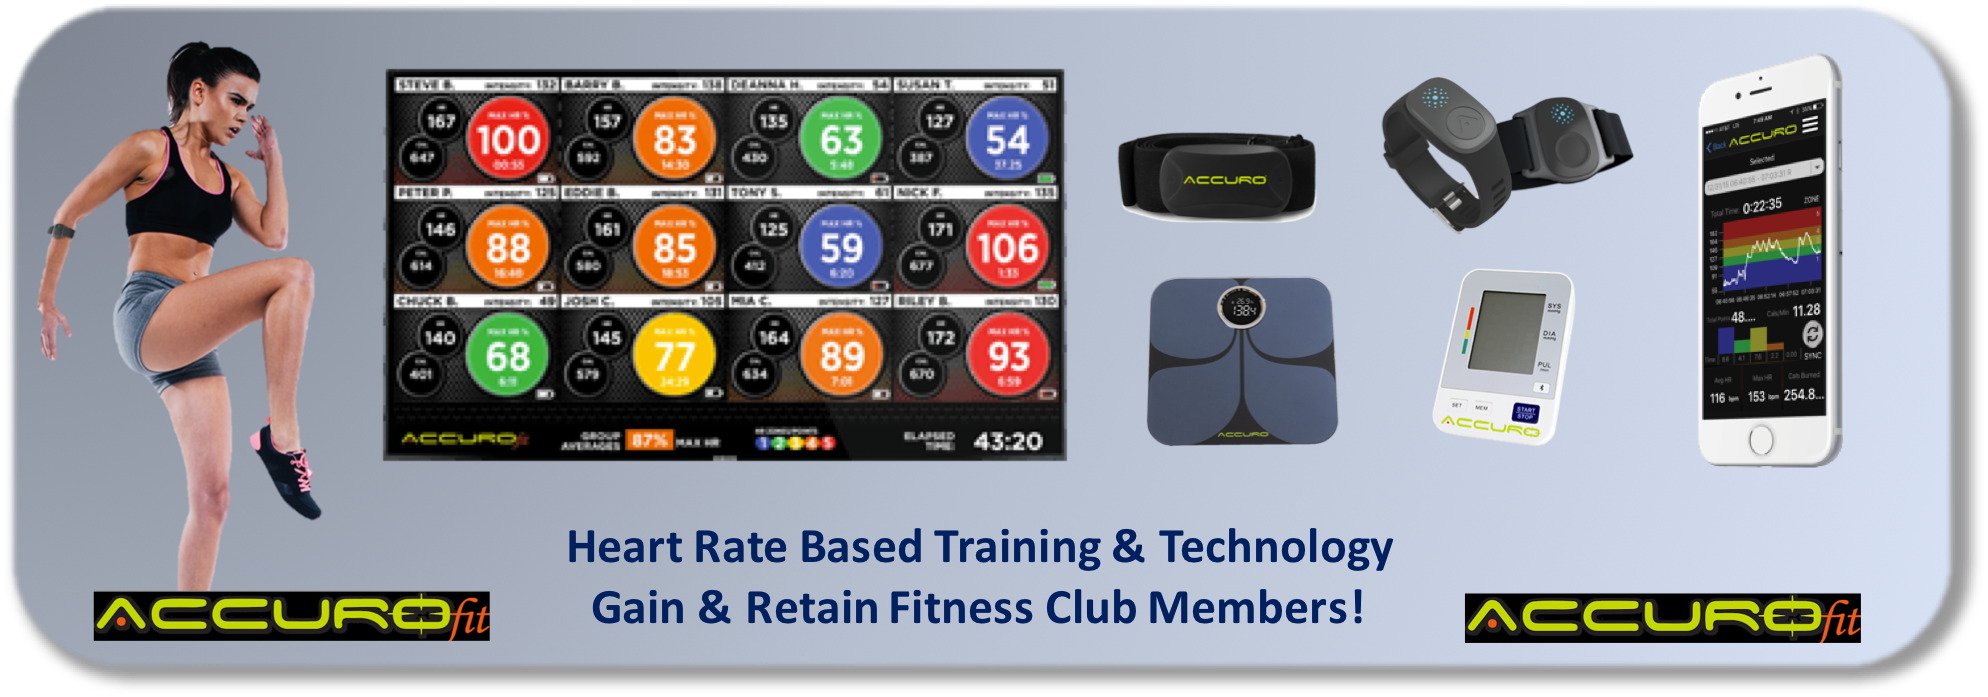 AccuroFit Heart Rate Training